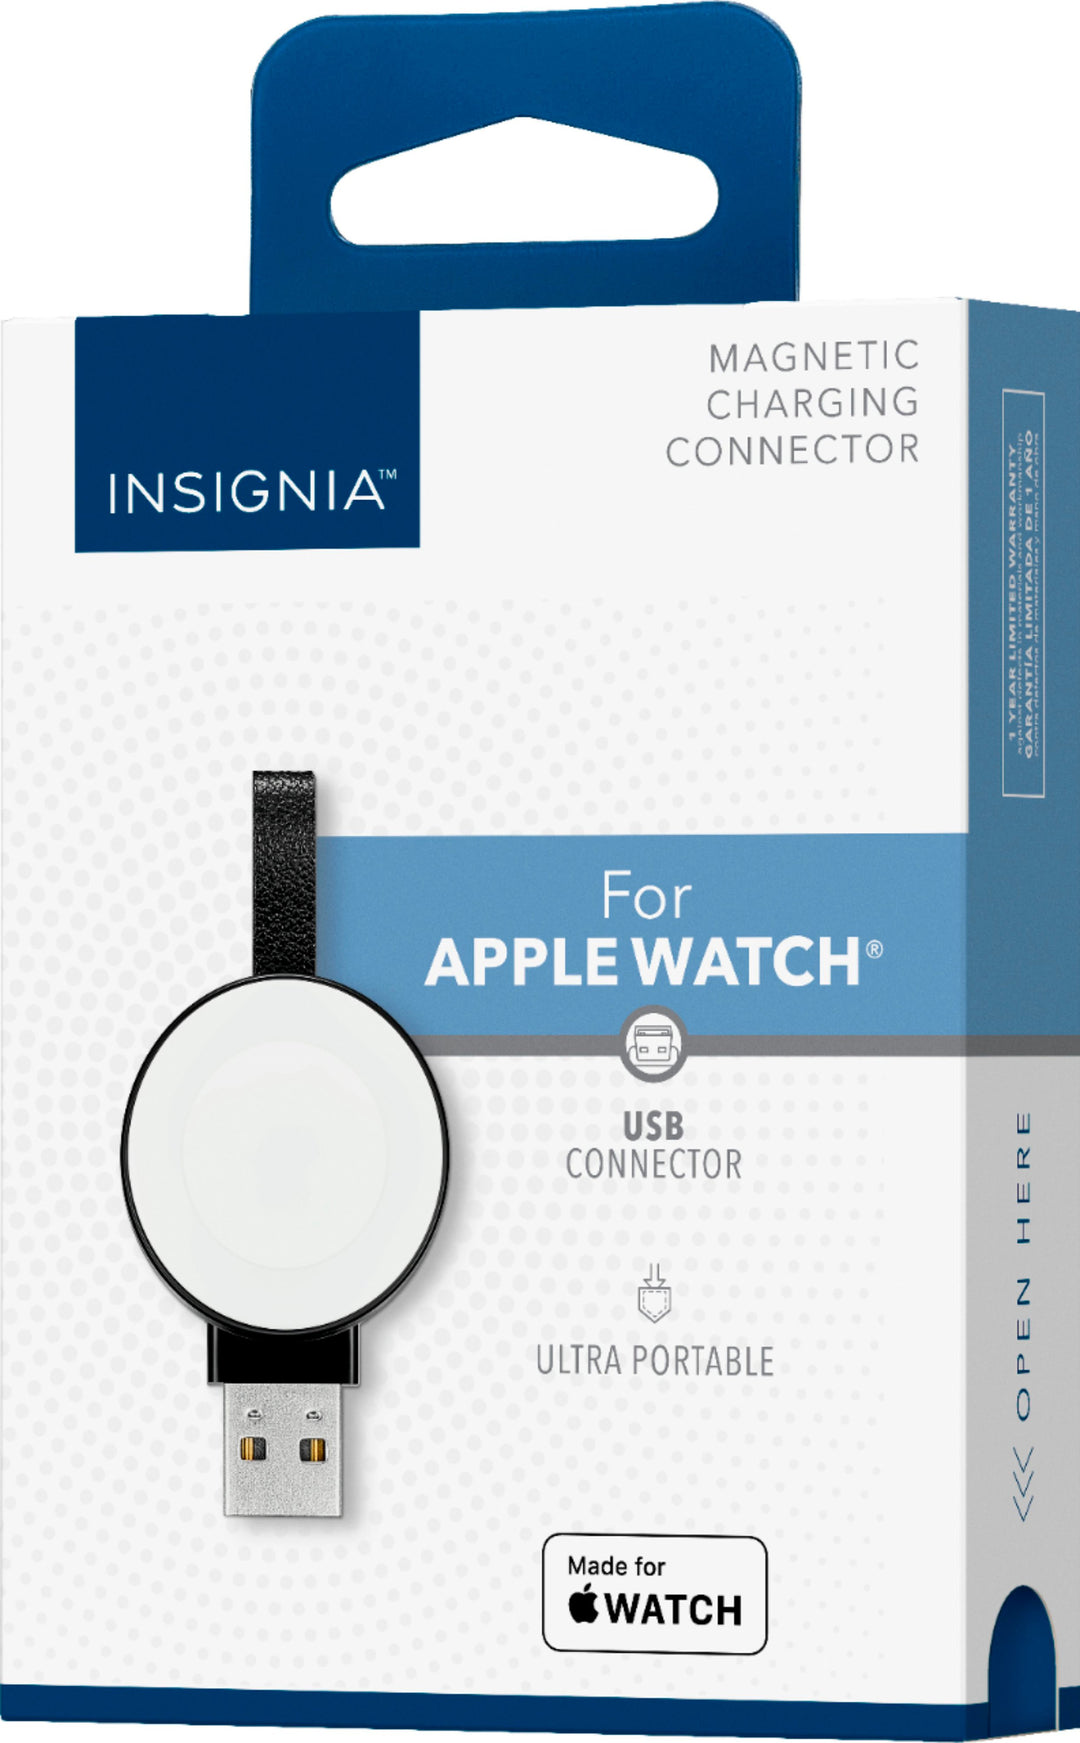 Insignia™ - Magnetic Charging Dongle for Apple Watch® - White_1